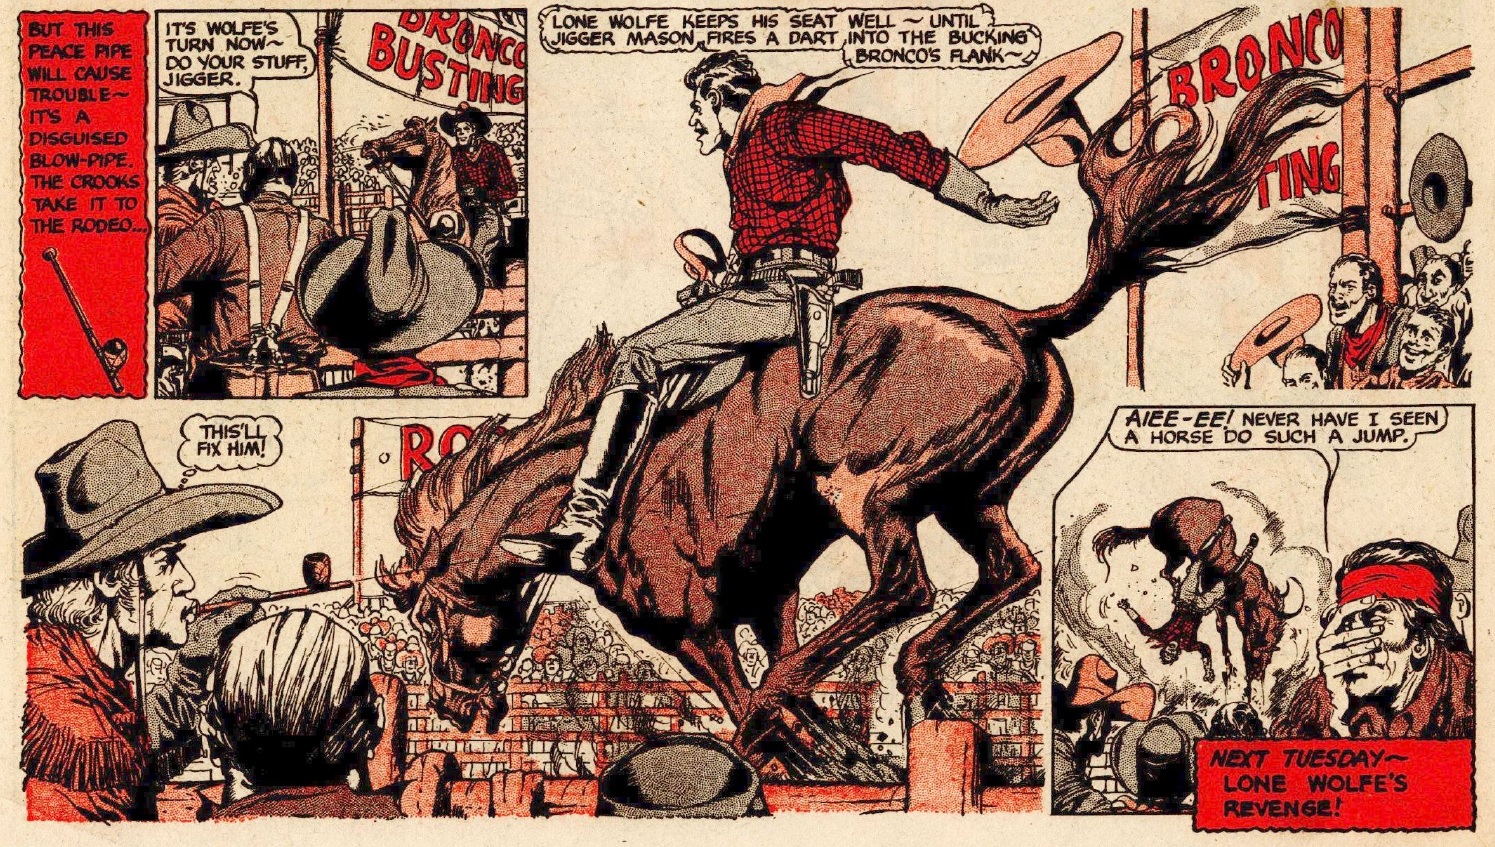 The Beezer Issue 52: Lone Wolfe - Rodeo Story